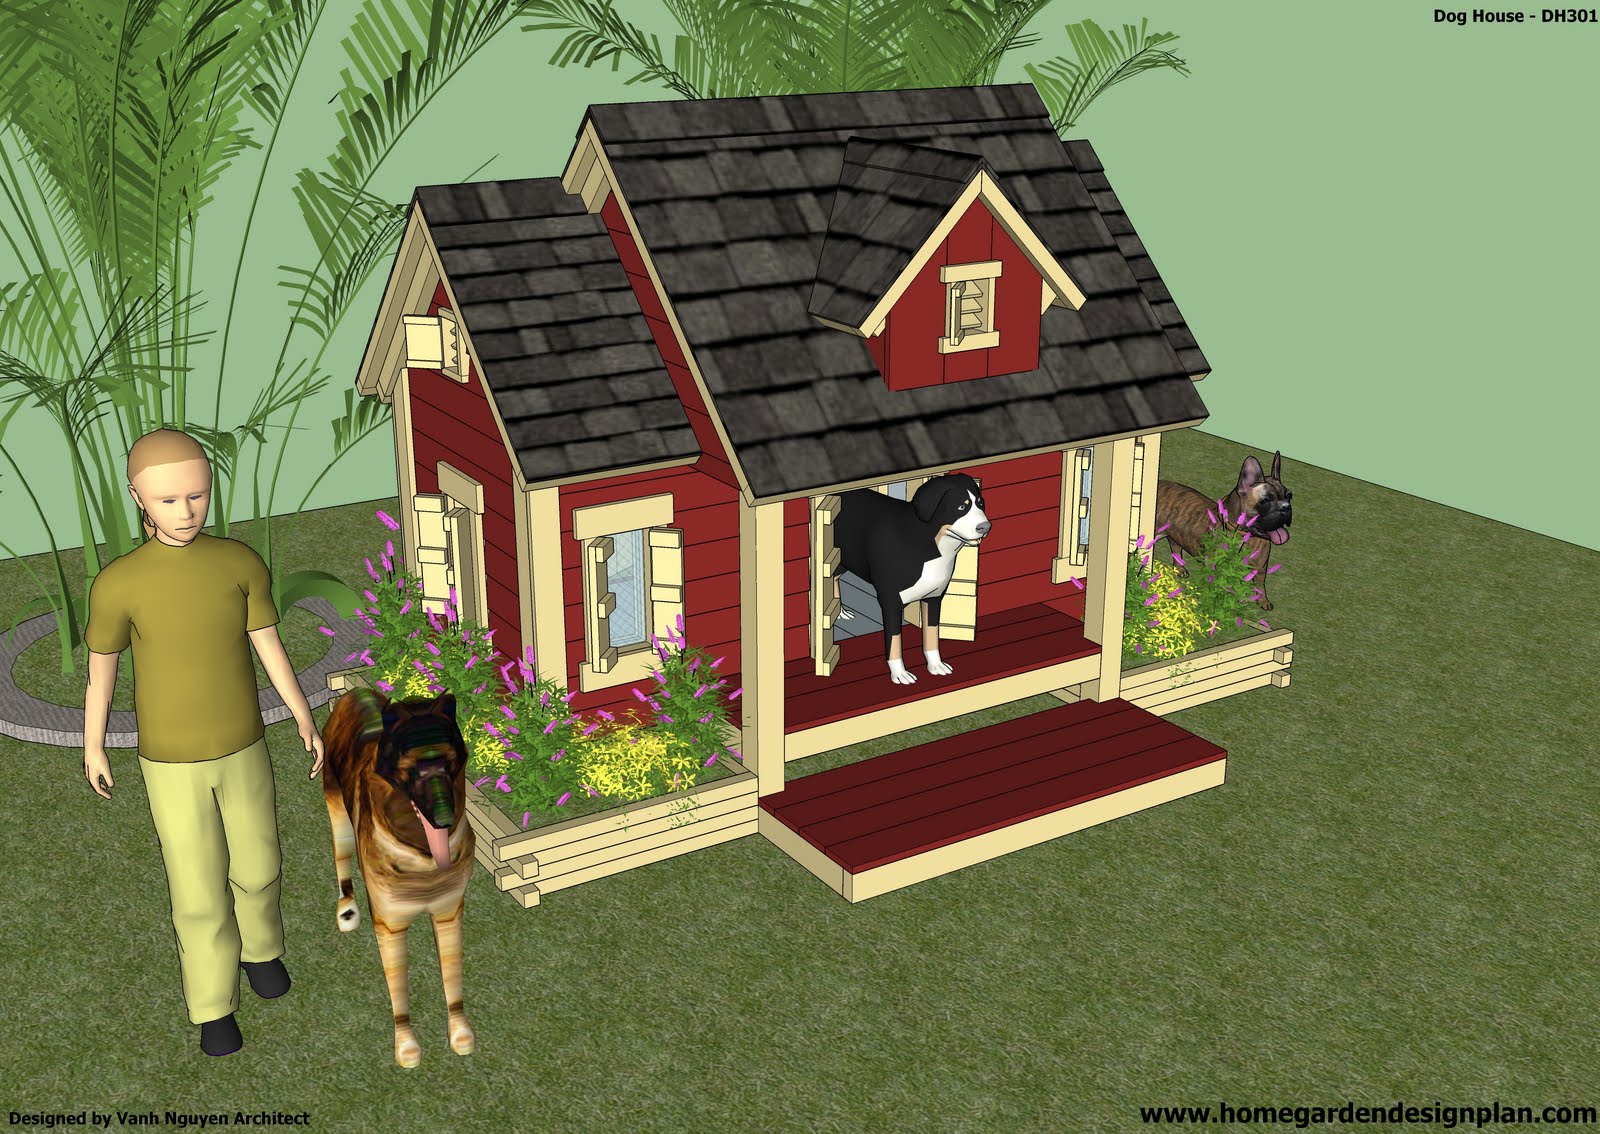 Insulated Dog House Plans